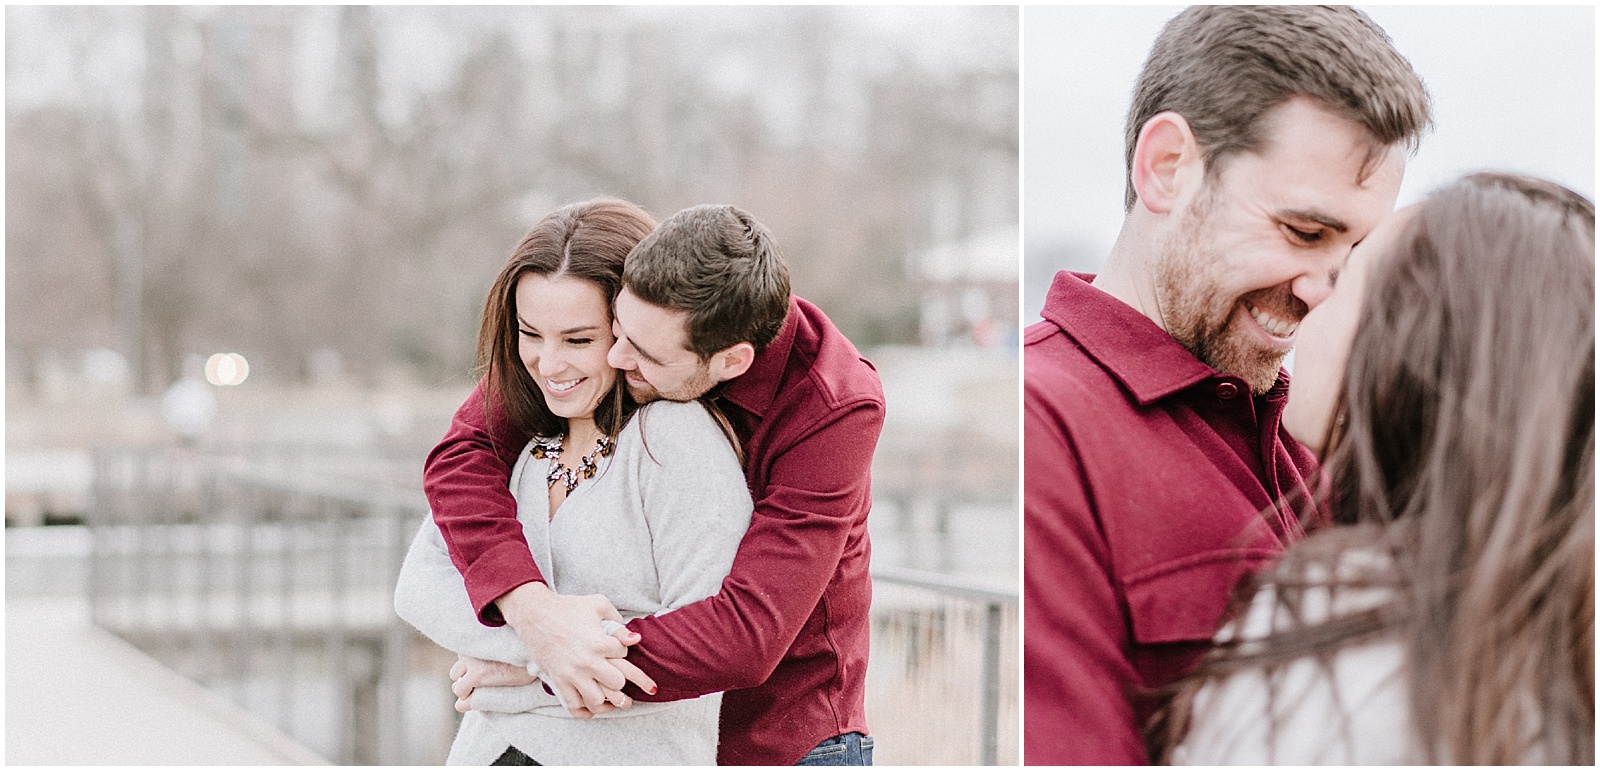 Engagement photos in park in winter